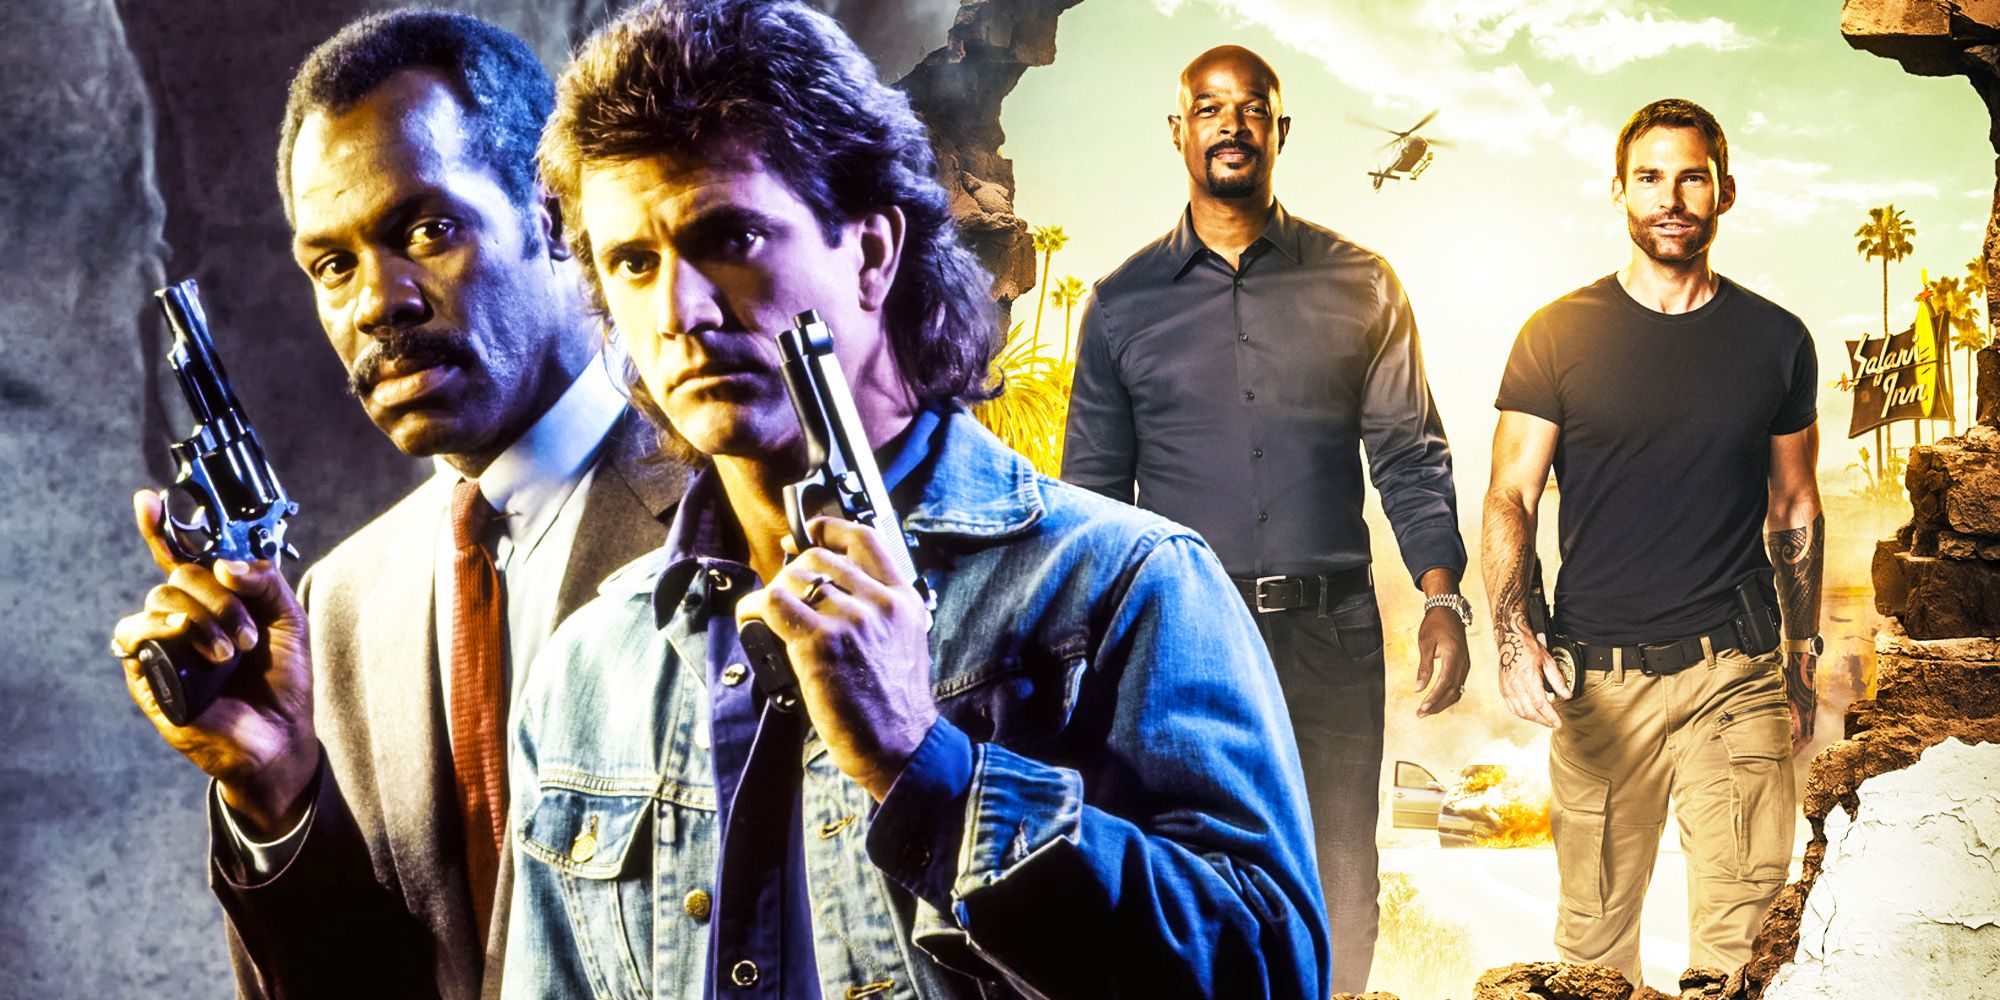 Lethal weapon movie and tv show